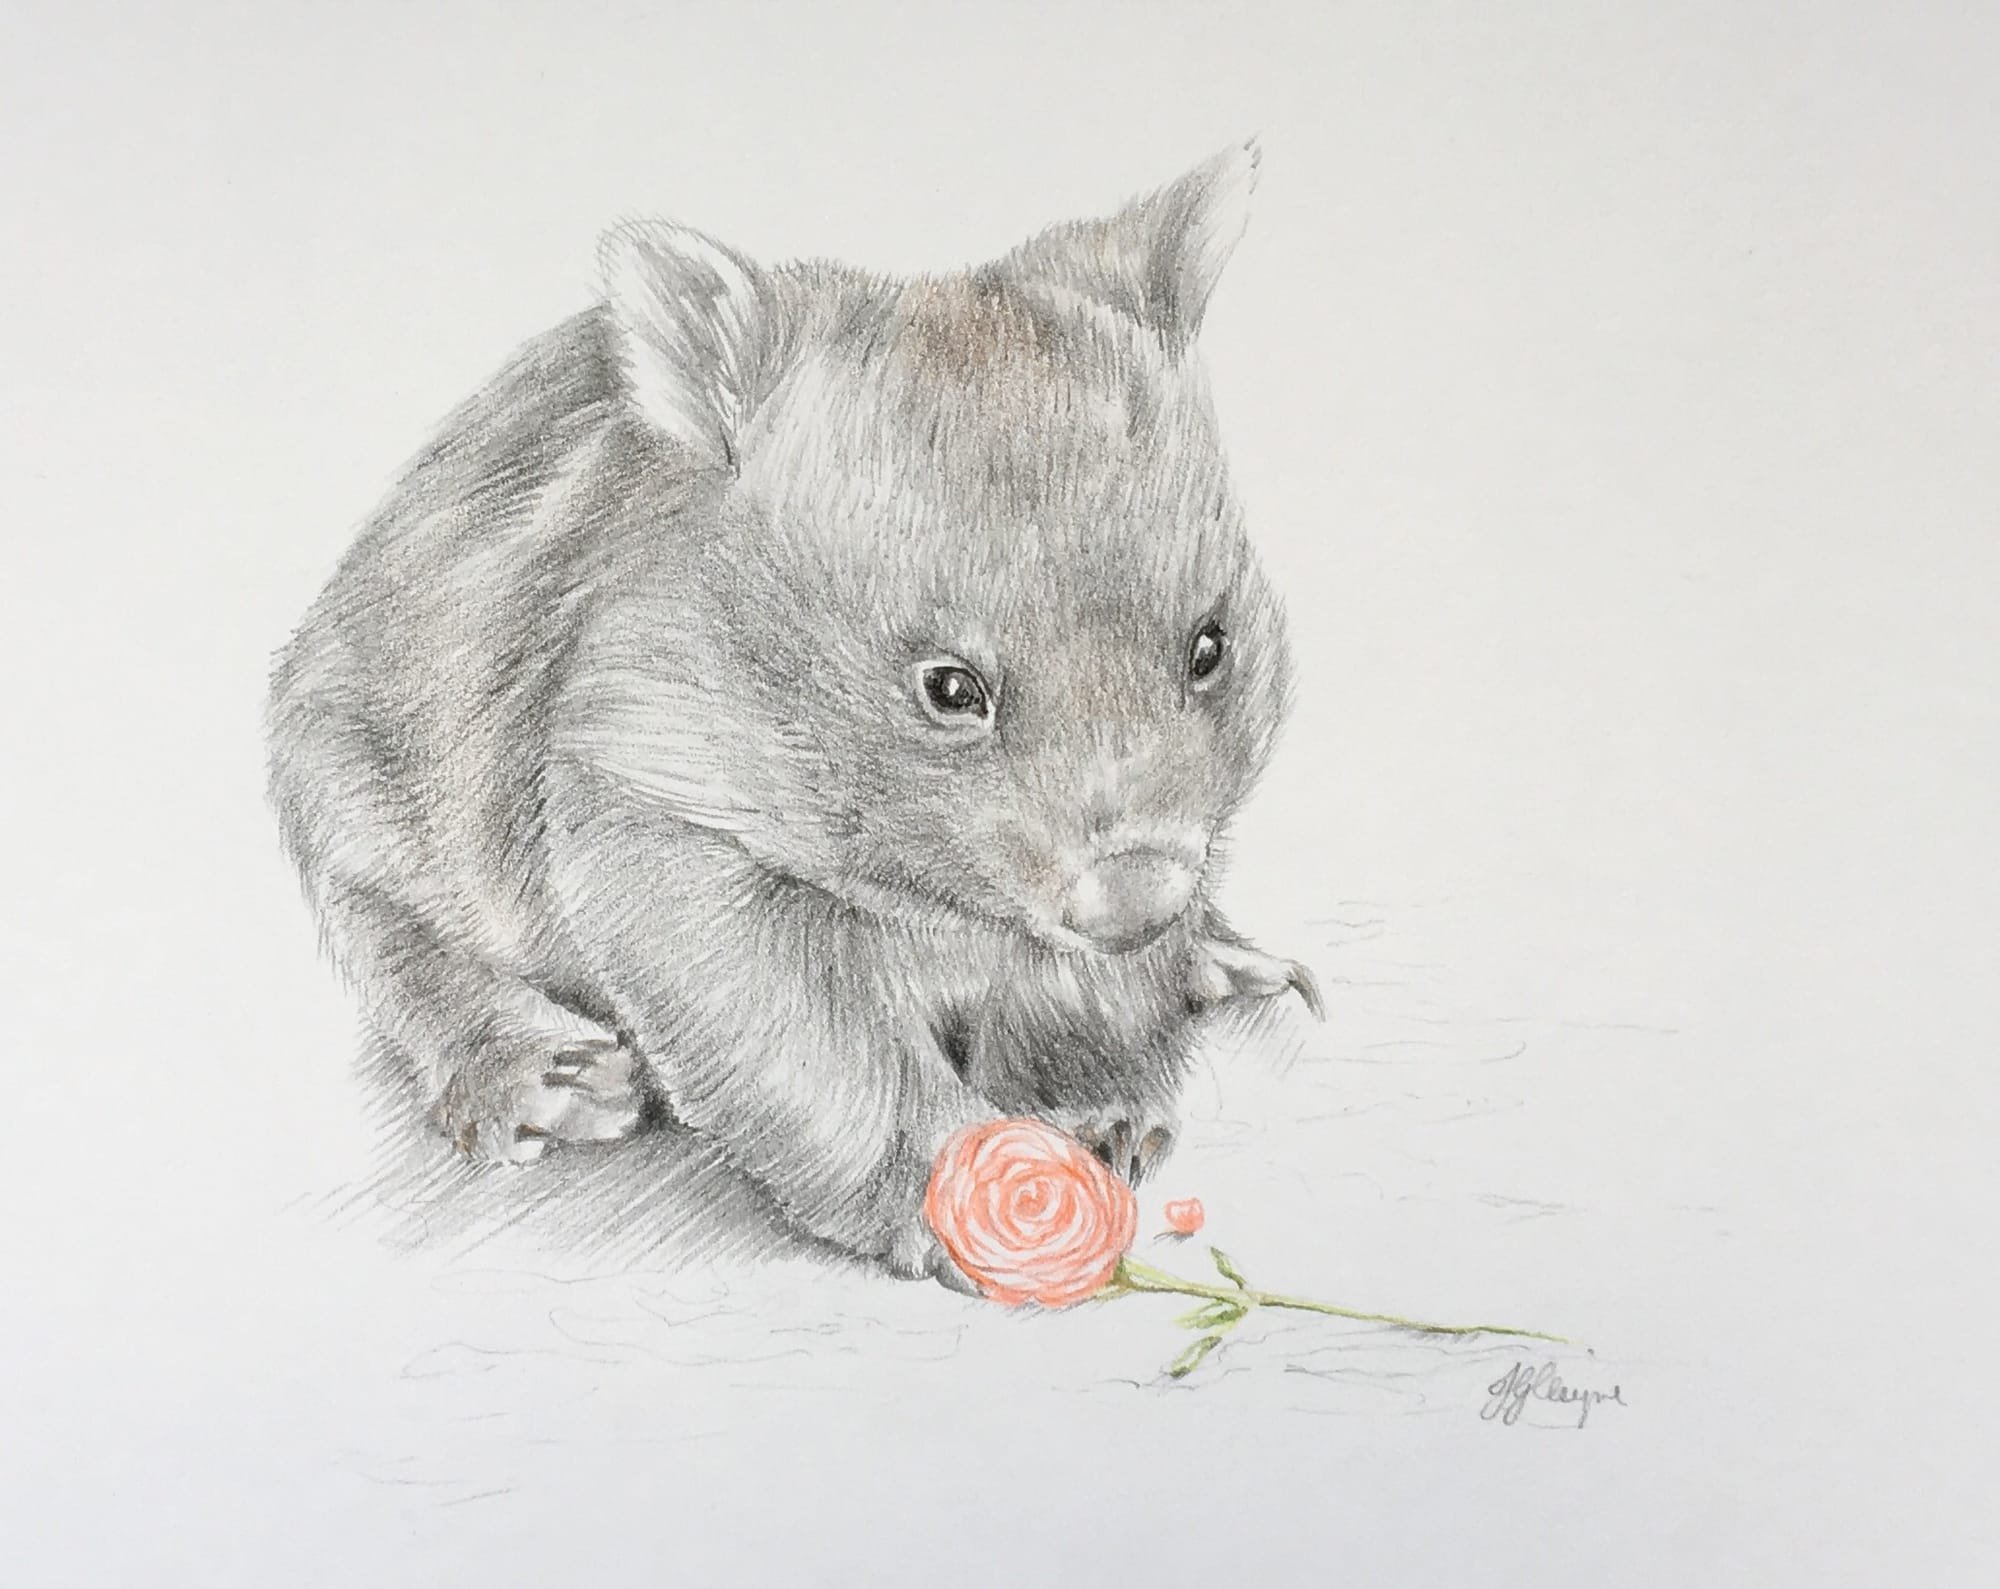 Will you accept this rose? - SOLD